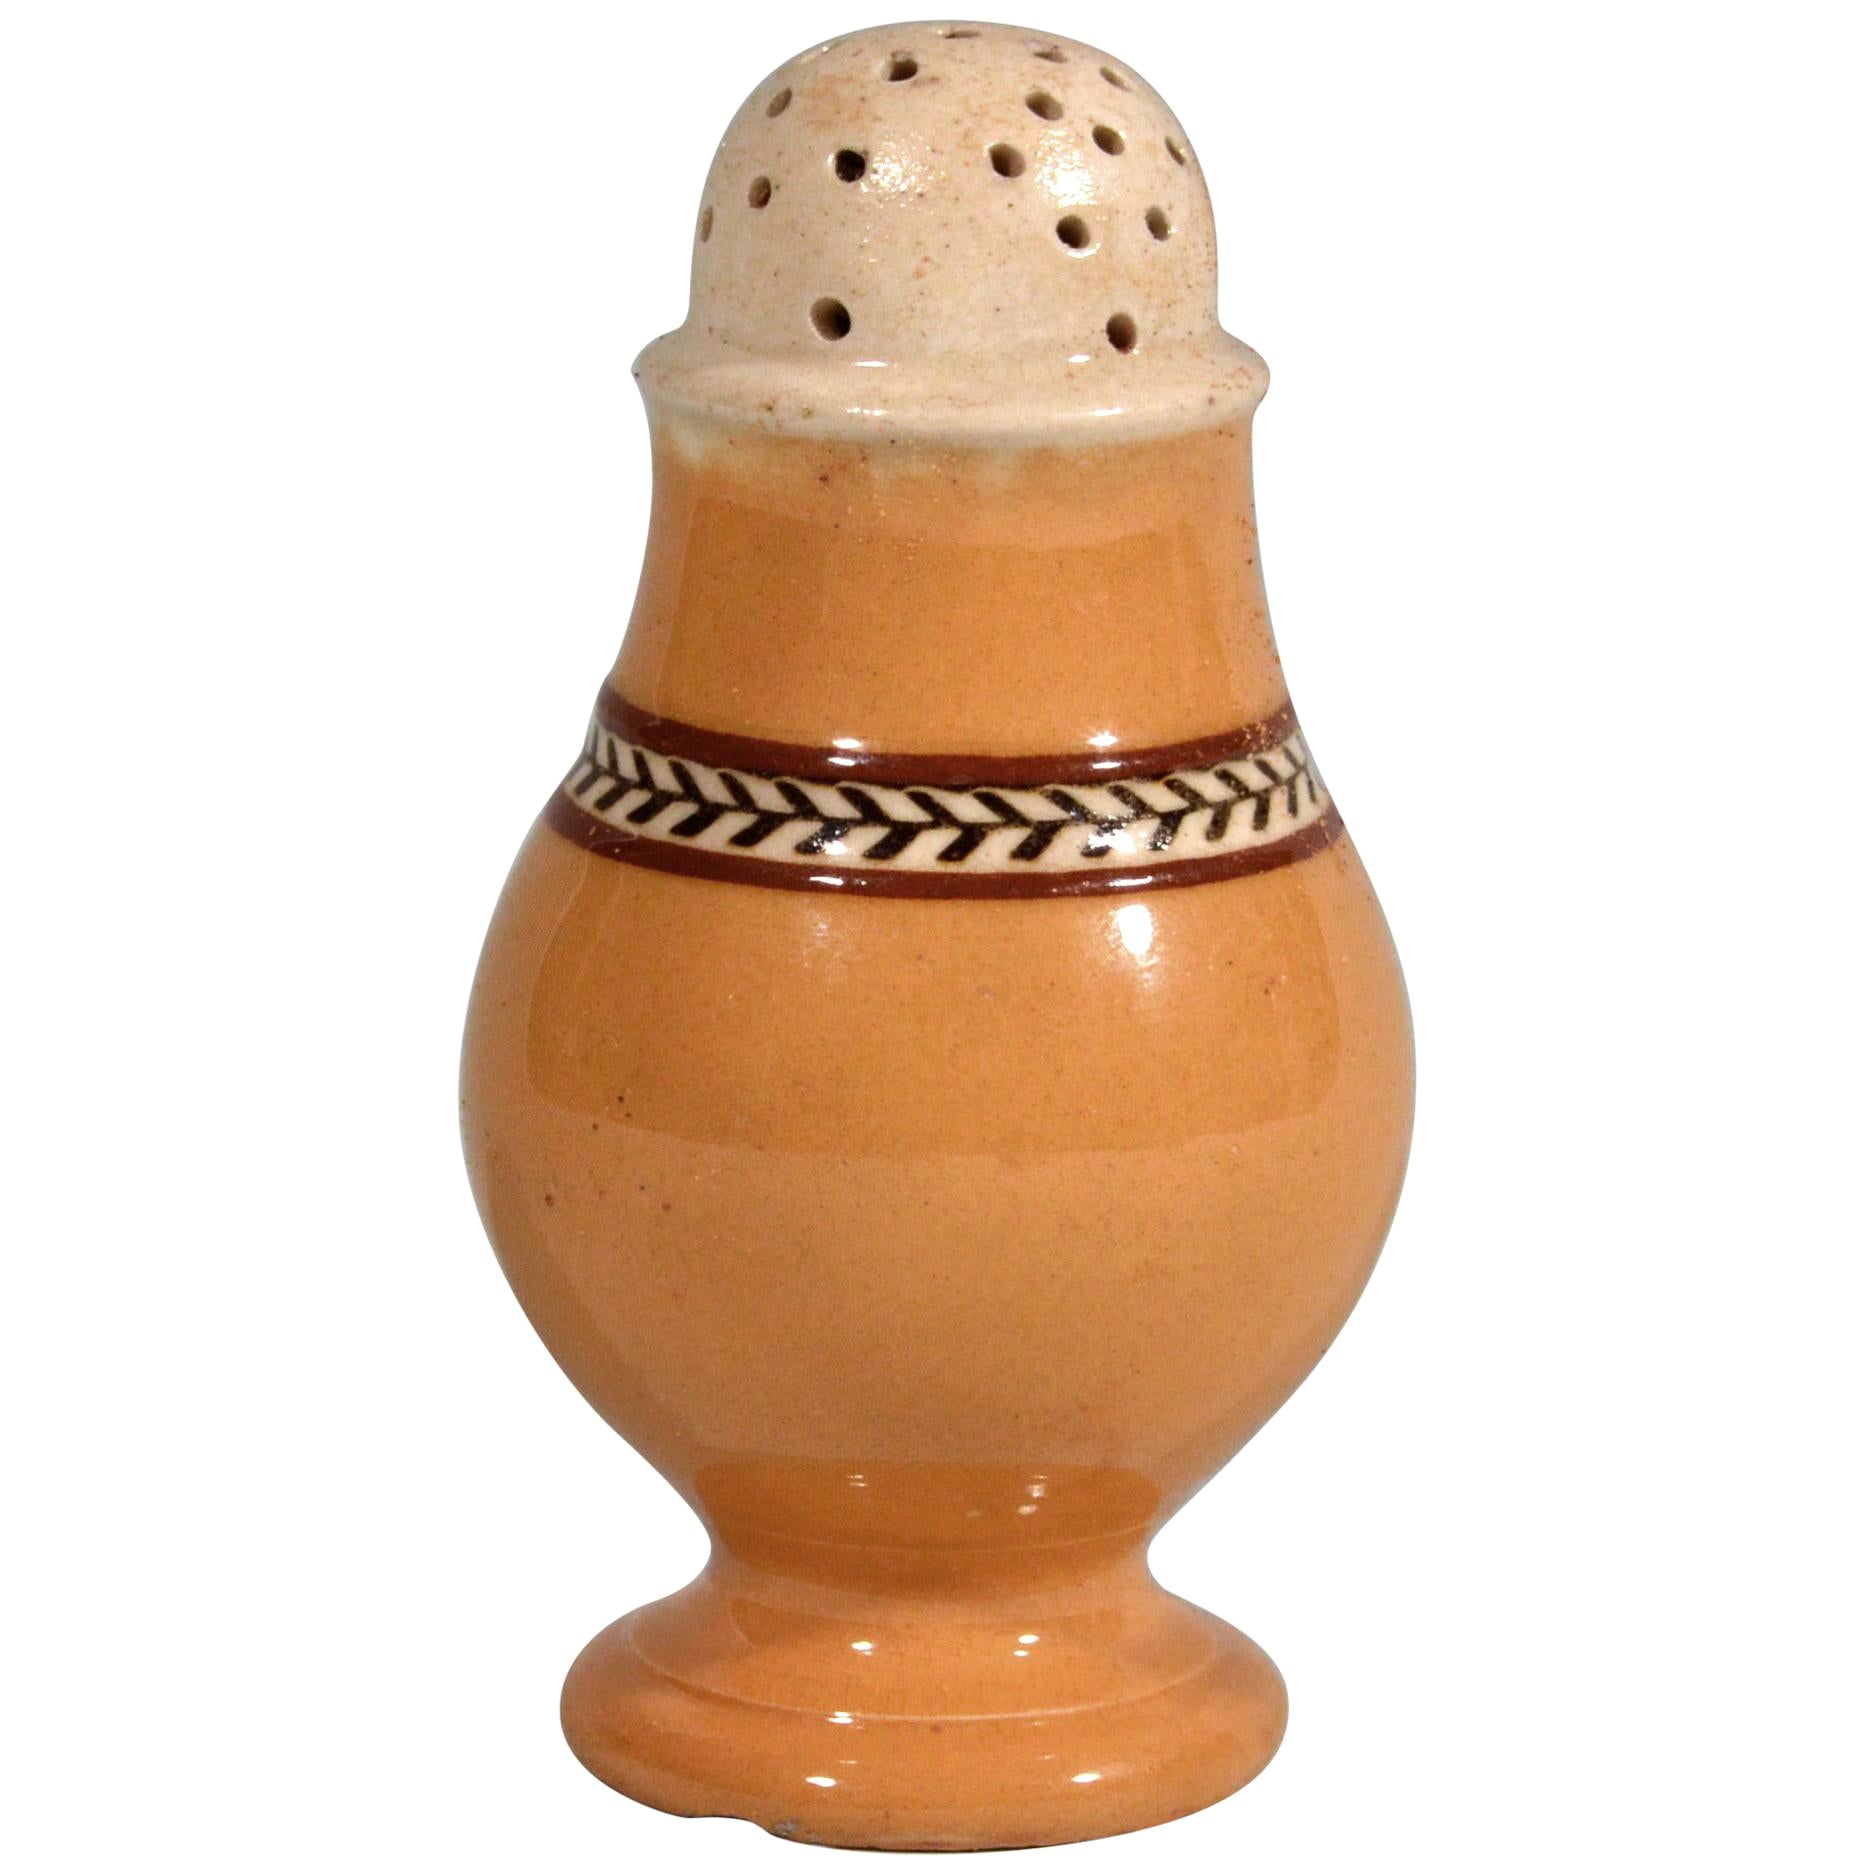 Mocha Pottery banded pepper pot, 
circa 1810

The bulbous circular Mocha pepper pot with a broad flared shoulder with bands of brown and light blue.

Dimensions: 4 3/4 inches high x 2 3/4 inches.